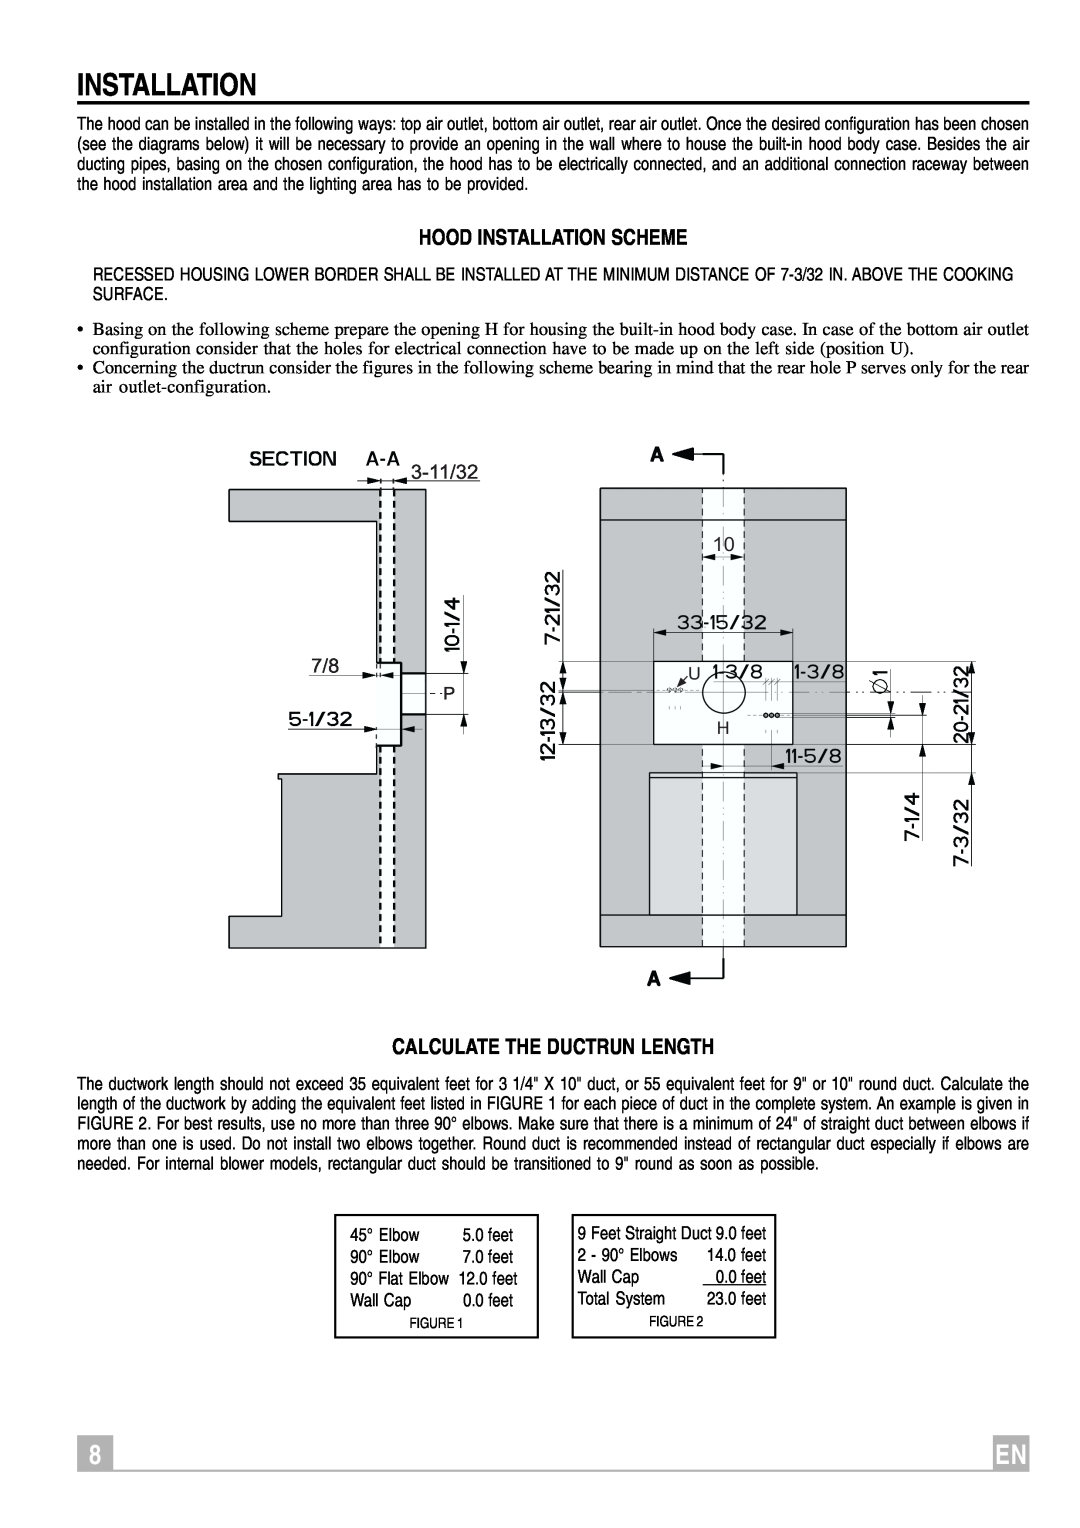 Faber Remote Blower instruction manual Hood Installation Scheme, Calculate The Ductrun Length, 3-11/32 